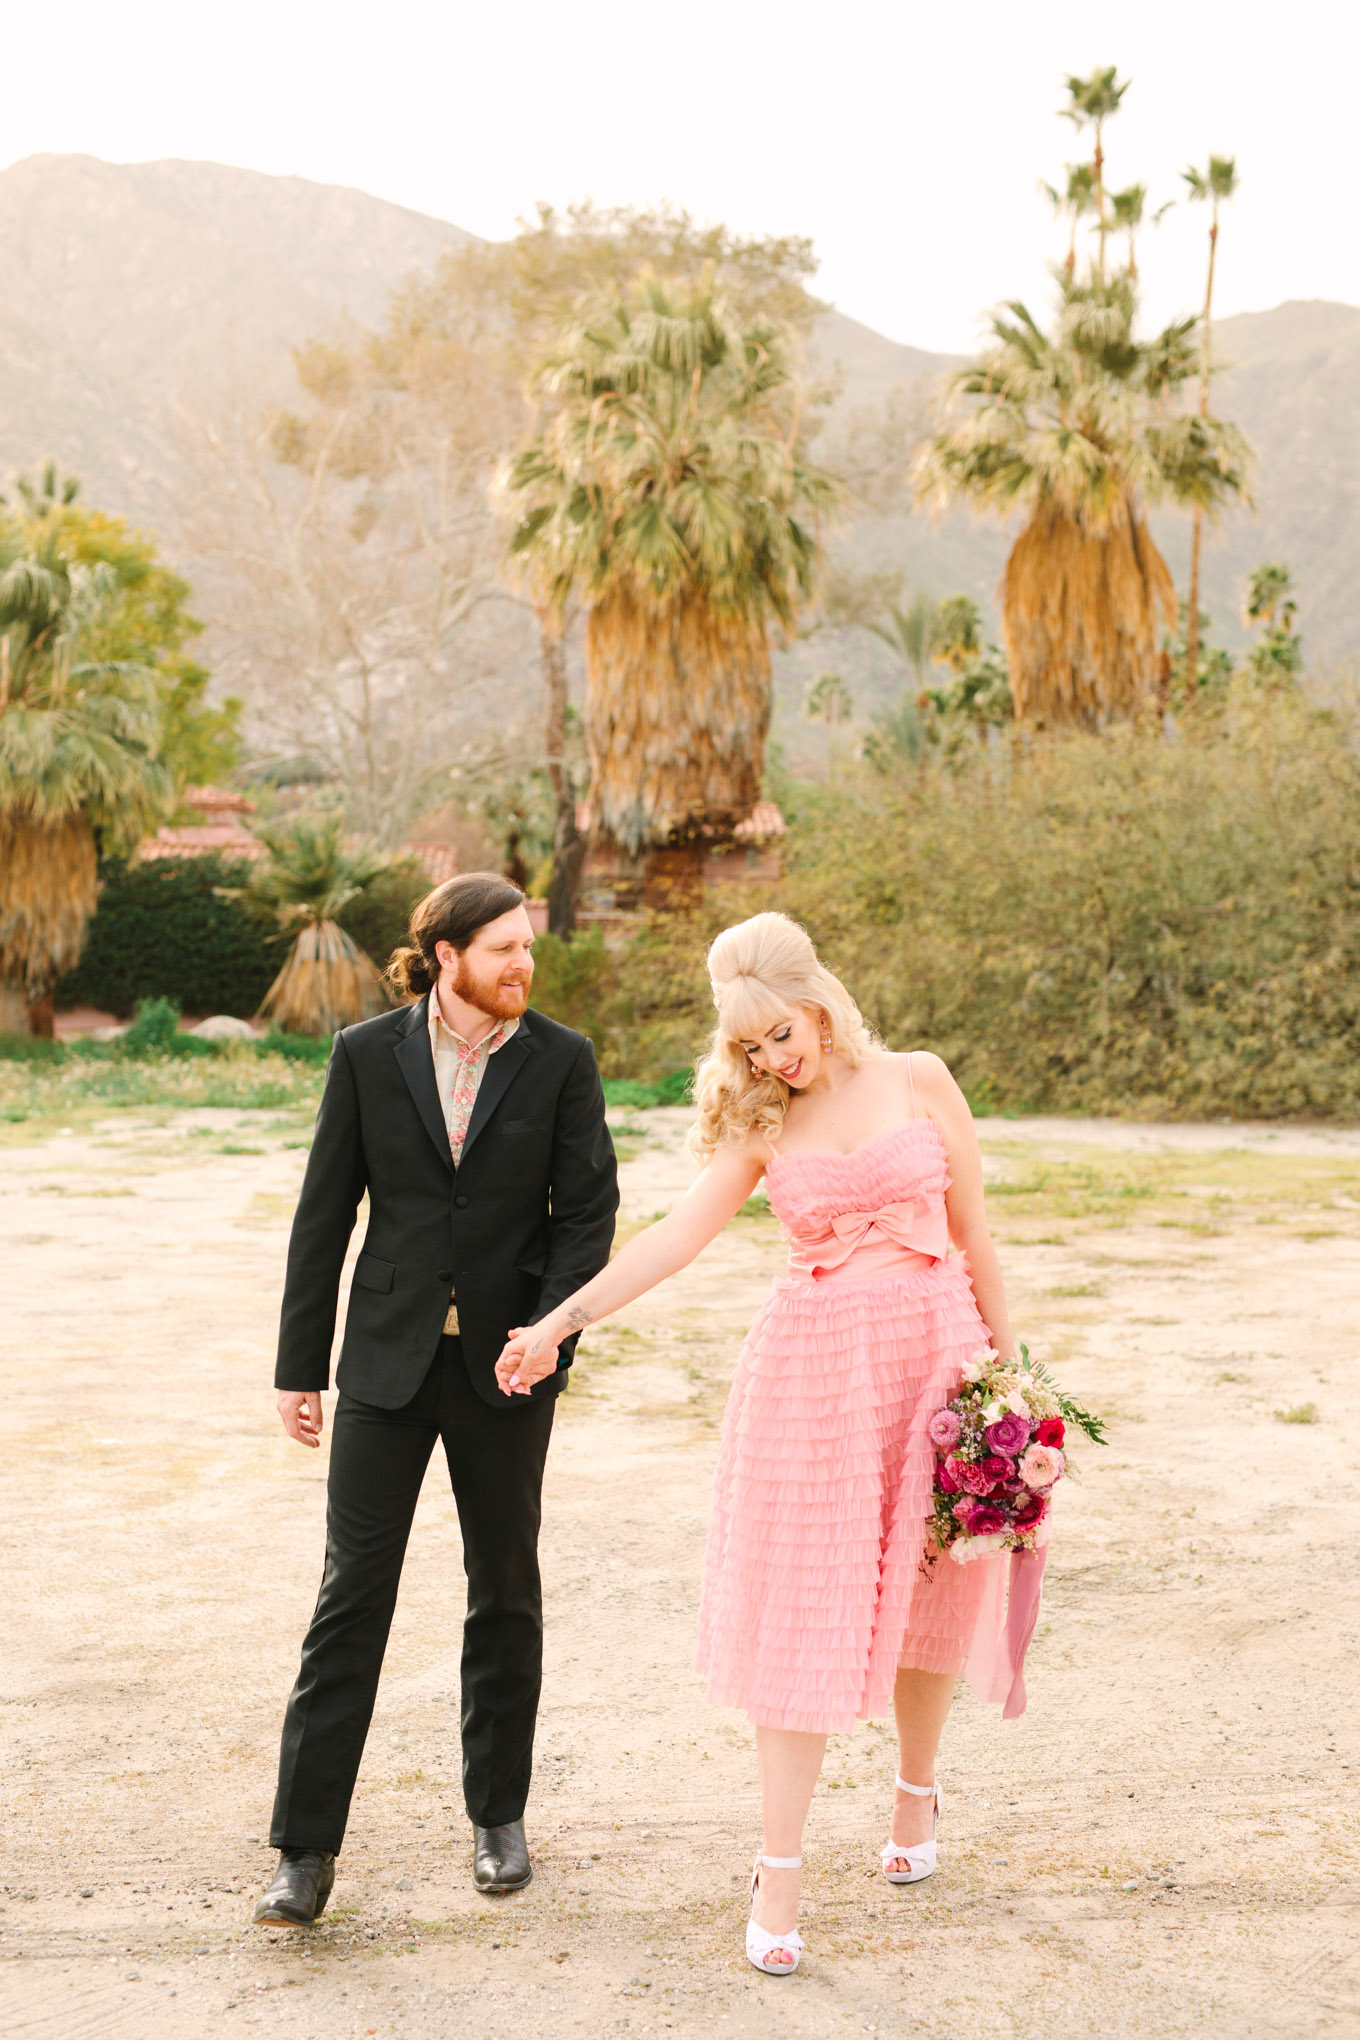 Modern vintage-inspired Palm Springs engagement session with a 1960s pink Cadillac, retro clothing, and flowers by Shindig Chic. | Colorful and elevated wedding inspiration for fun-loving couples in Southern California | #engagementsession #PalmSpringsengagement #vintageweddingdress #floralcar #pinkcar   Source: Mary Costa Photography | Los Angeles